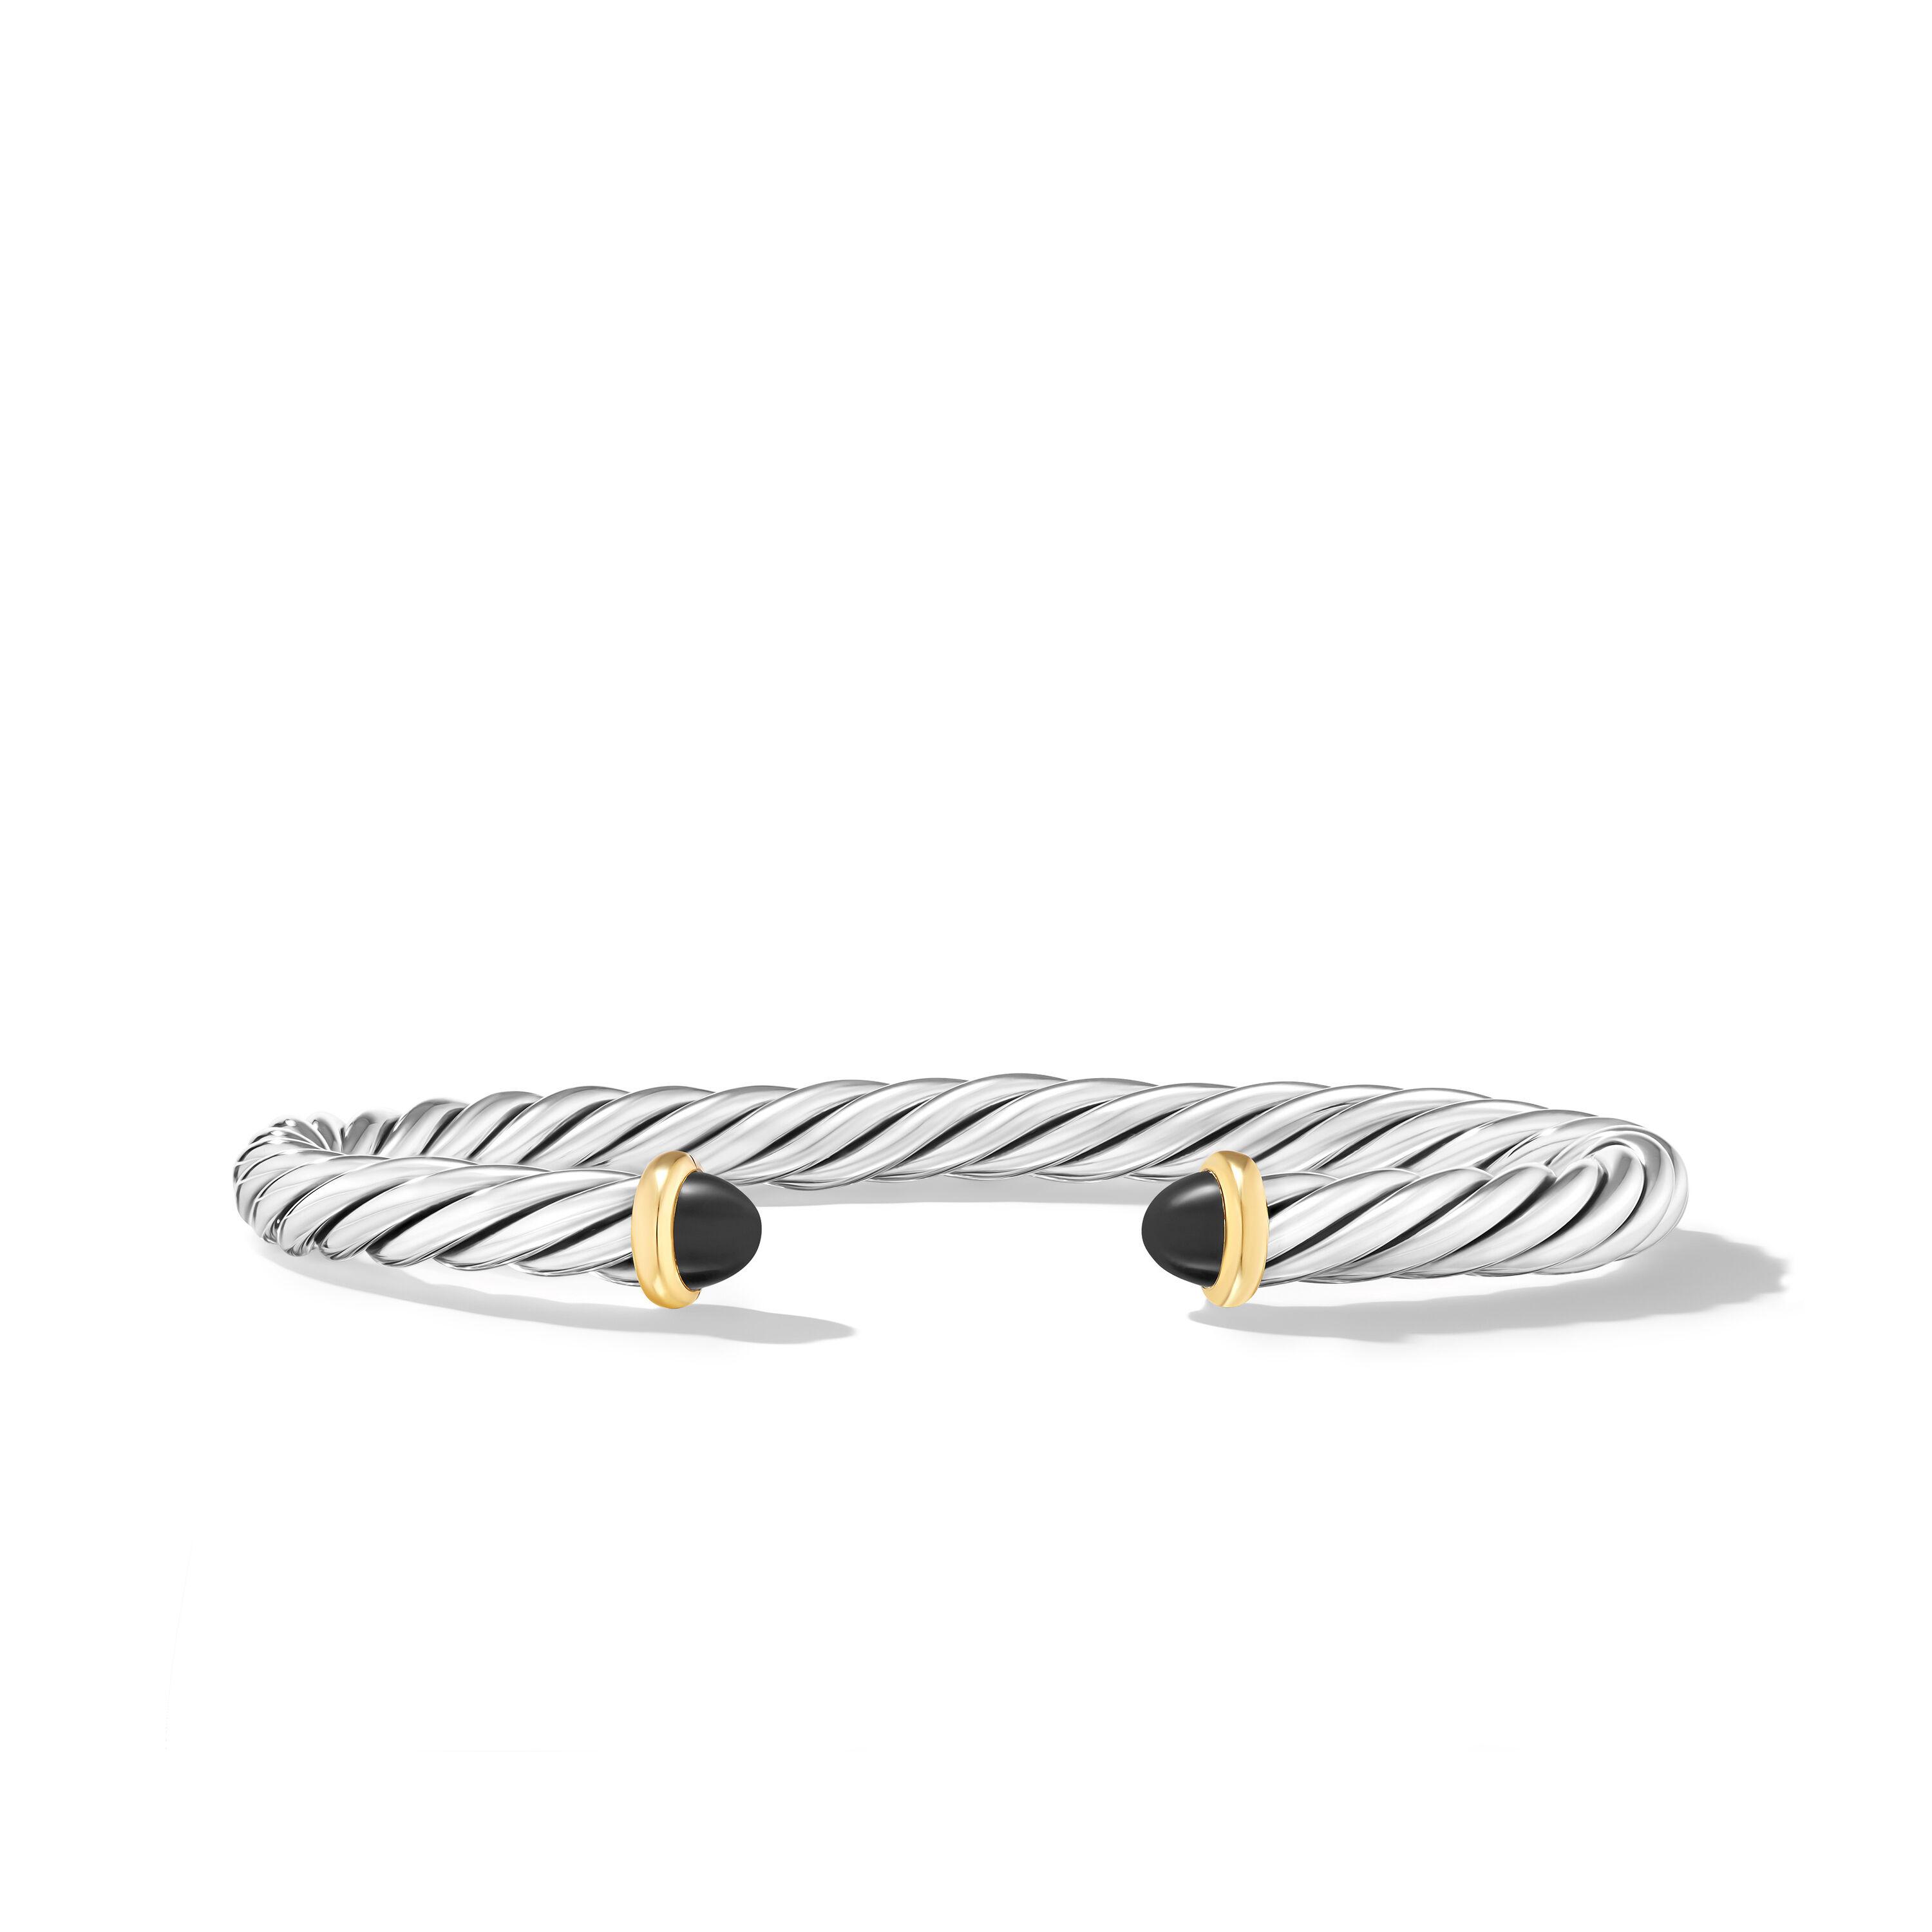 David Yurman 6mm Cable Cuff Bracelet in Sterling Silver with 14K Yellow Gold and Black Onyx, Small